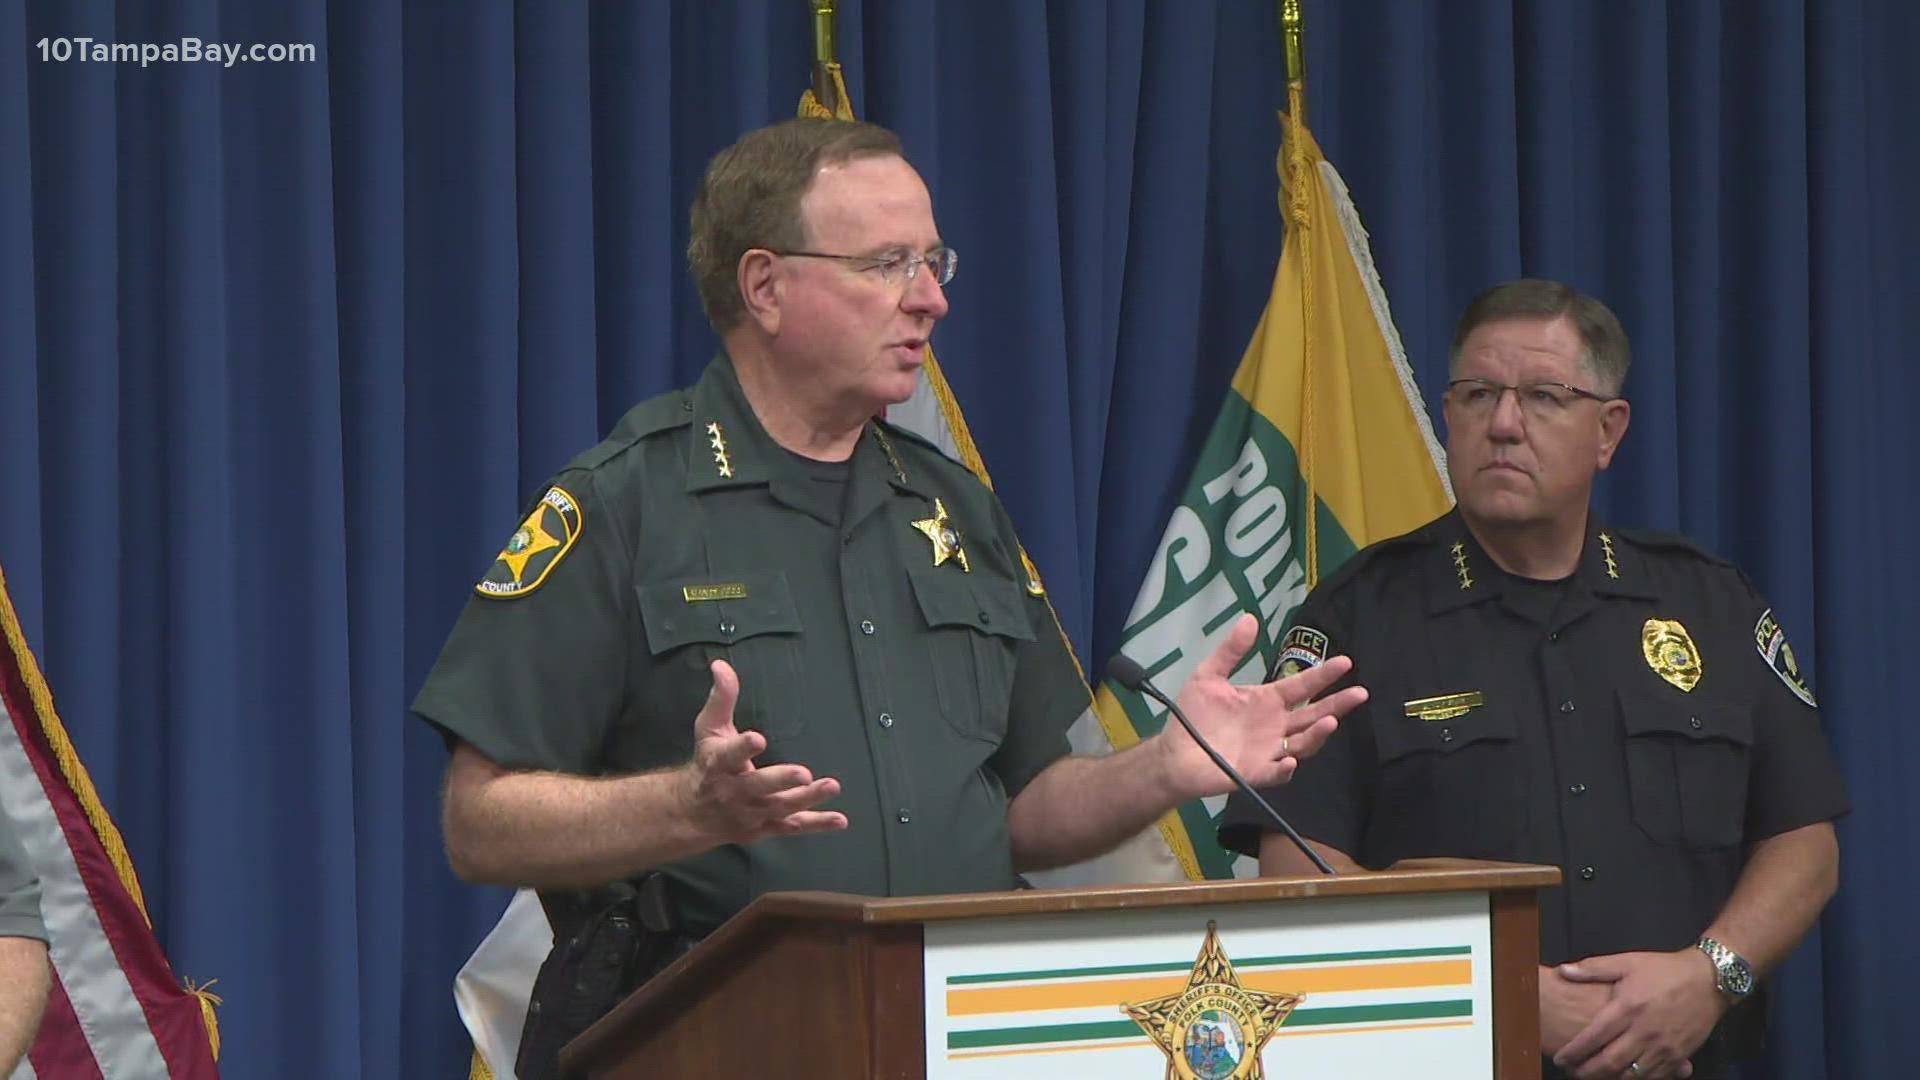 The Polk County Sheriff's Office revealed the details of Operation Child Protector at a news conference Tuesday afternoon.